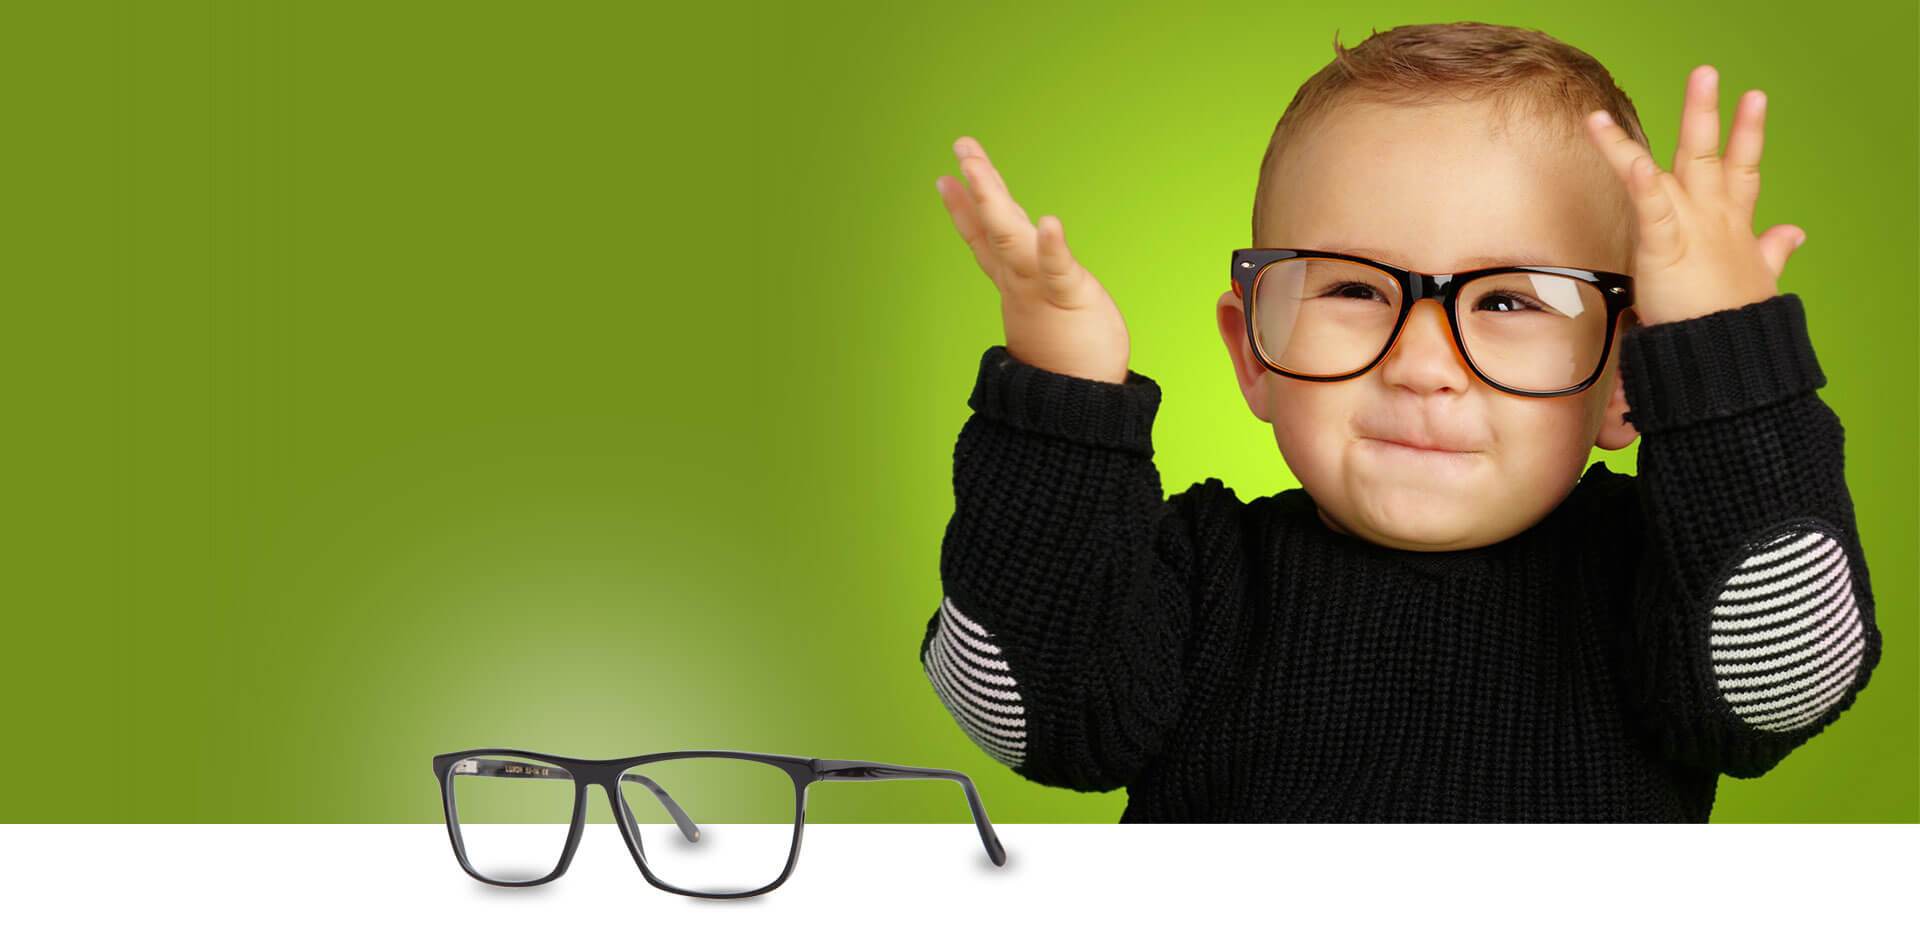 Optometrist for children, adults and senior citizens.